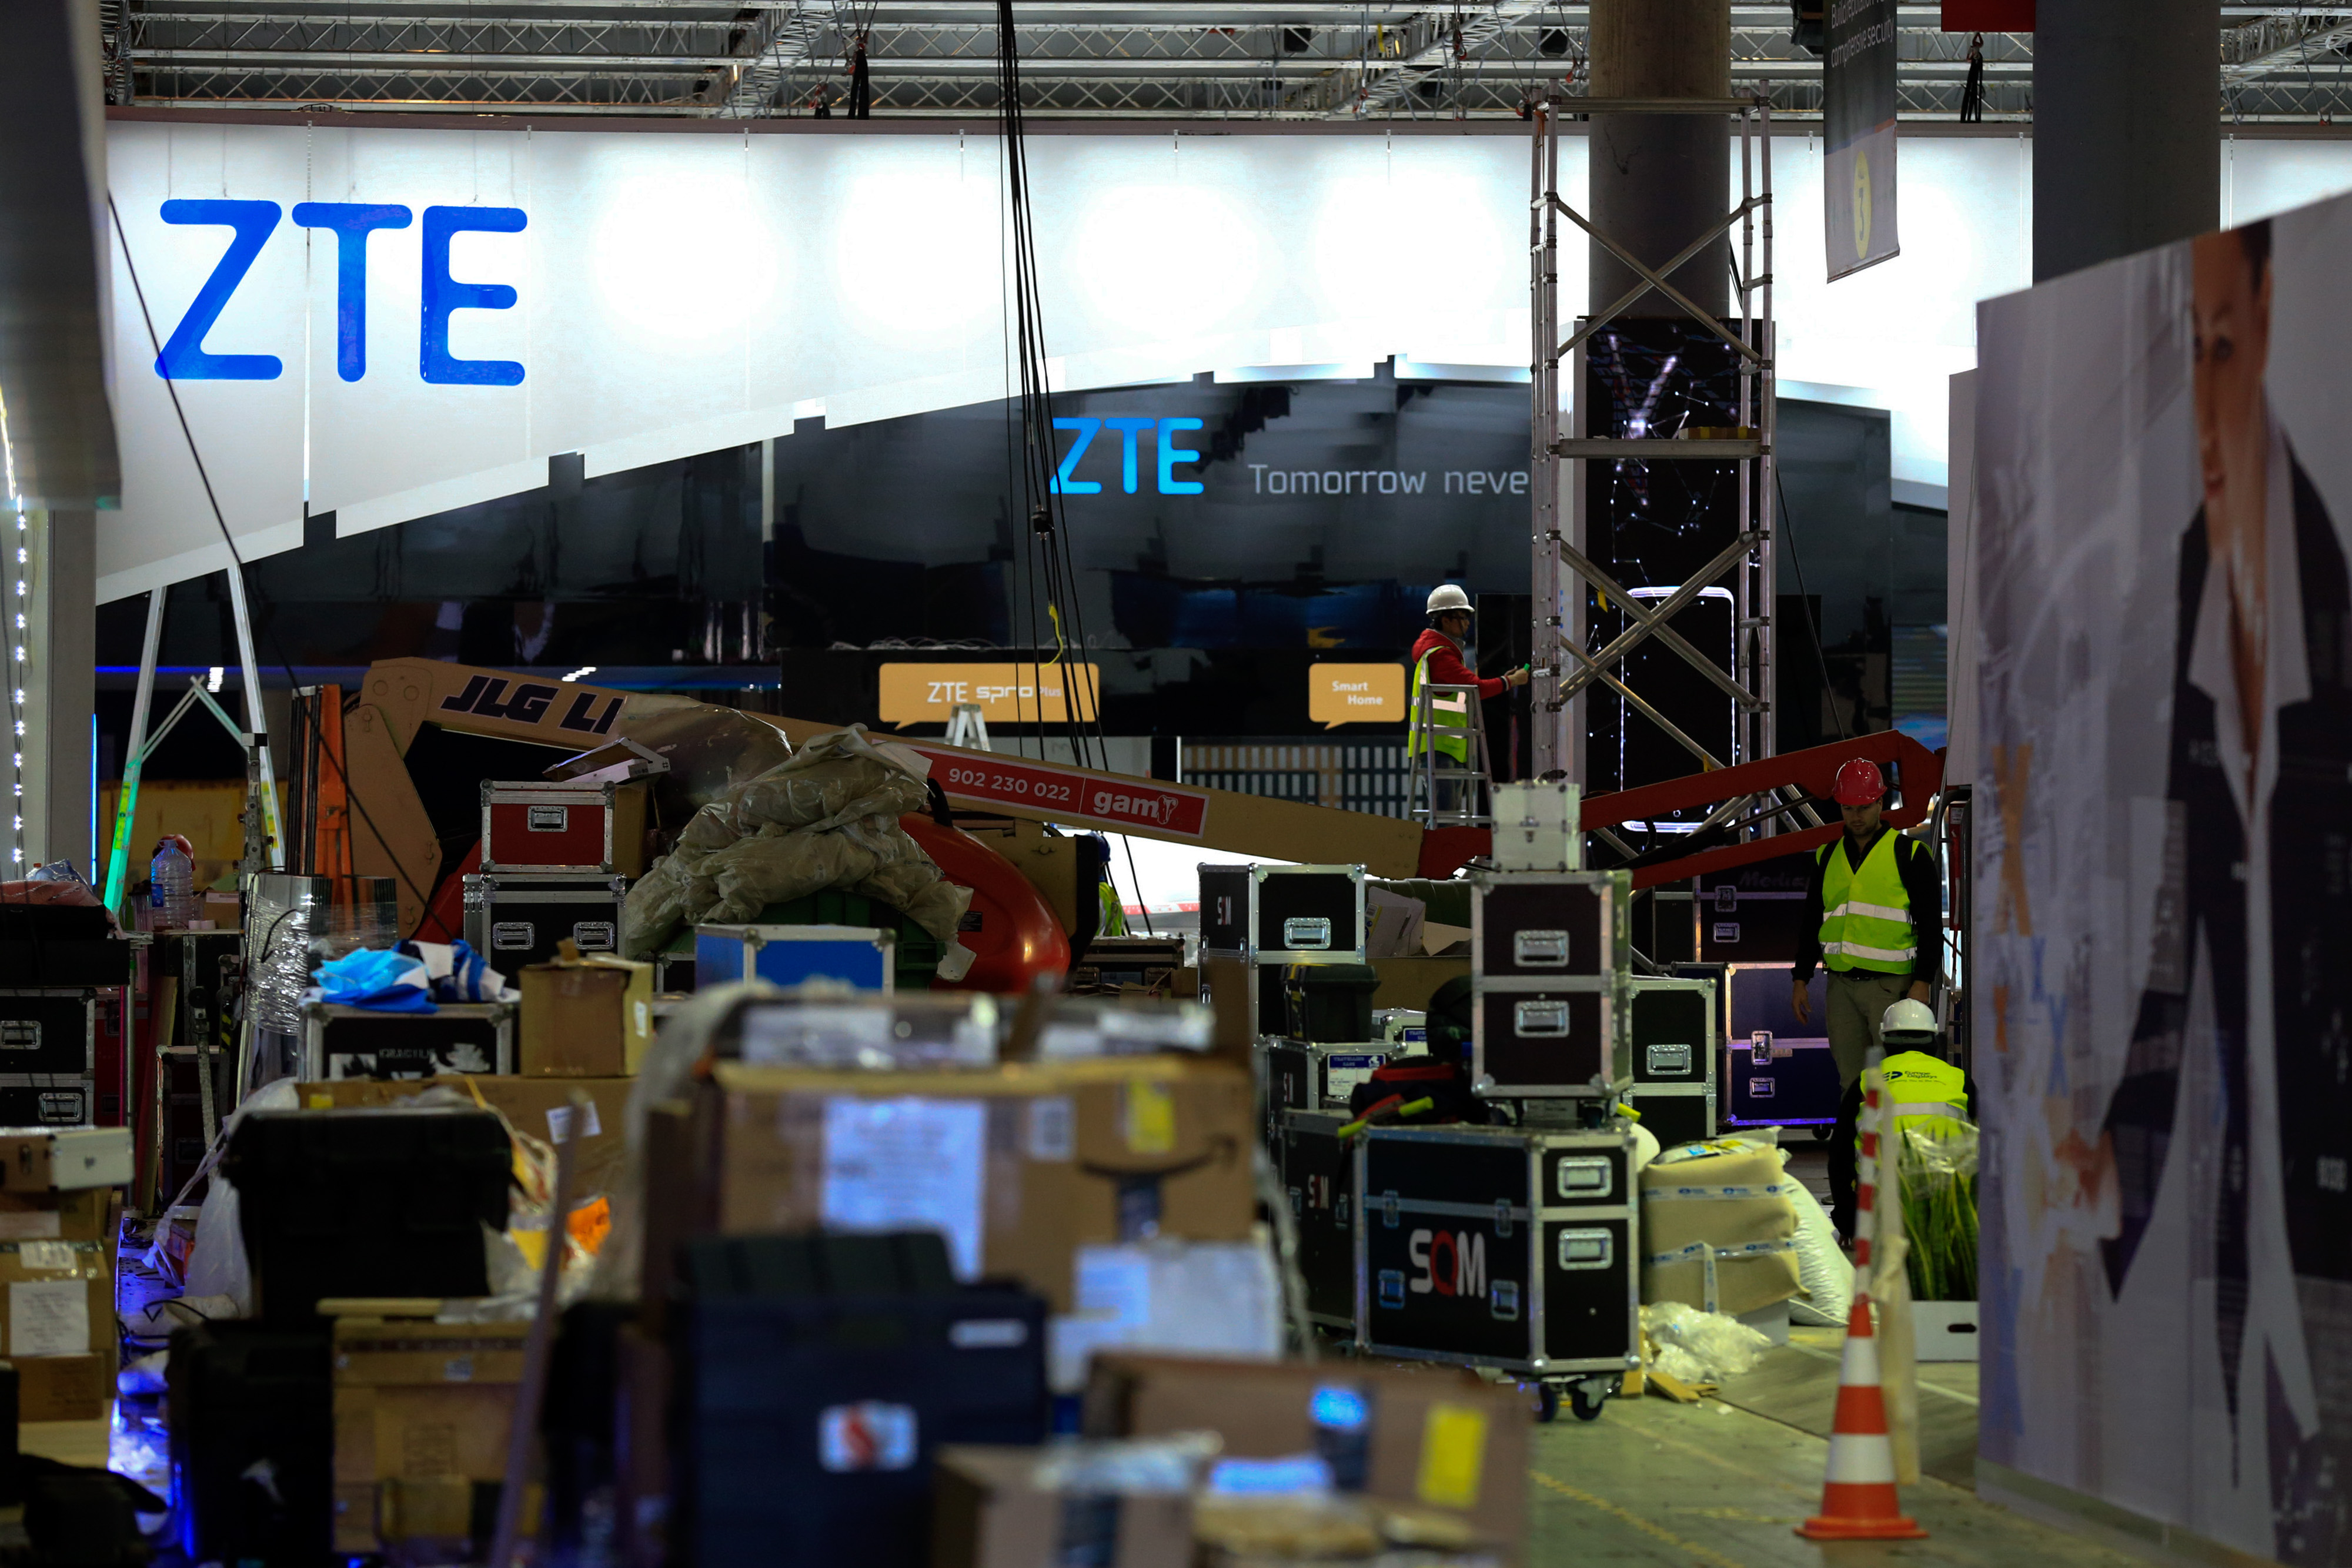 Workers make final preparations to ZTE’s stand at the Mobile World Congress in Barcelona on Saturday. Photo: Bloomberg